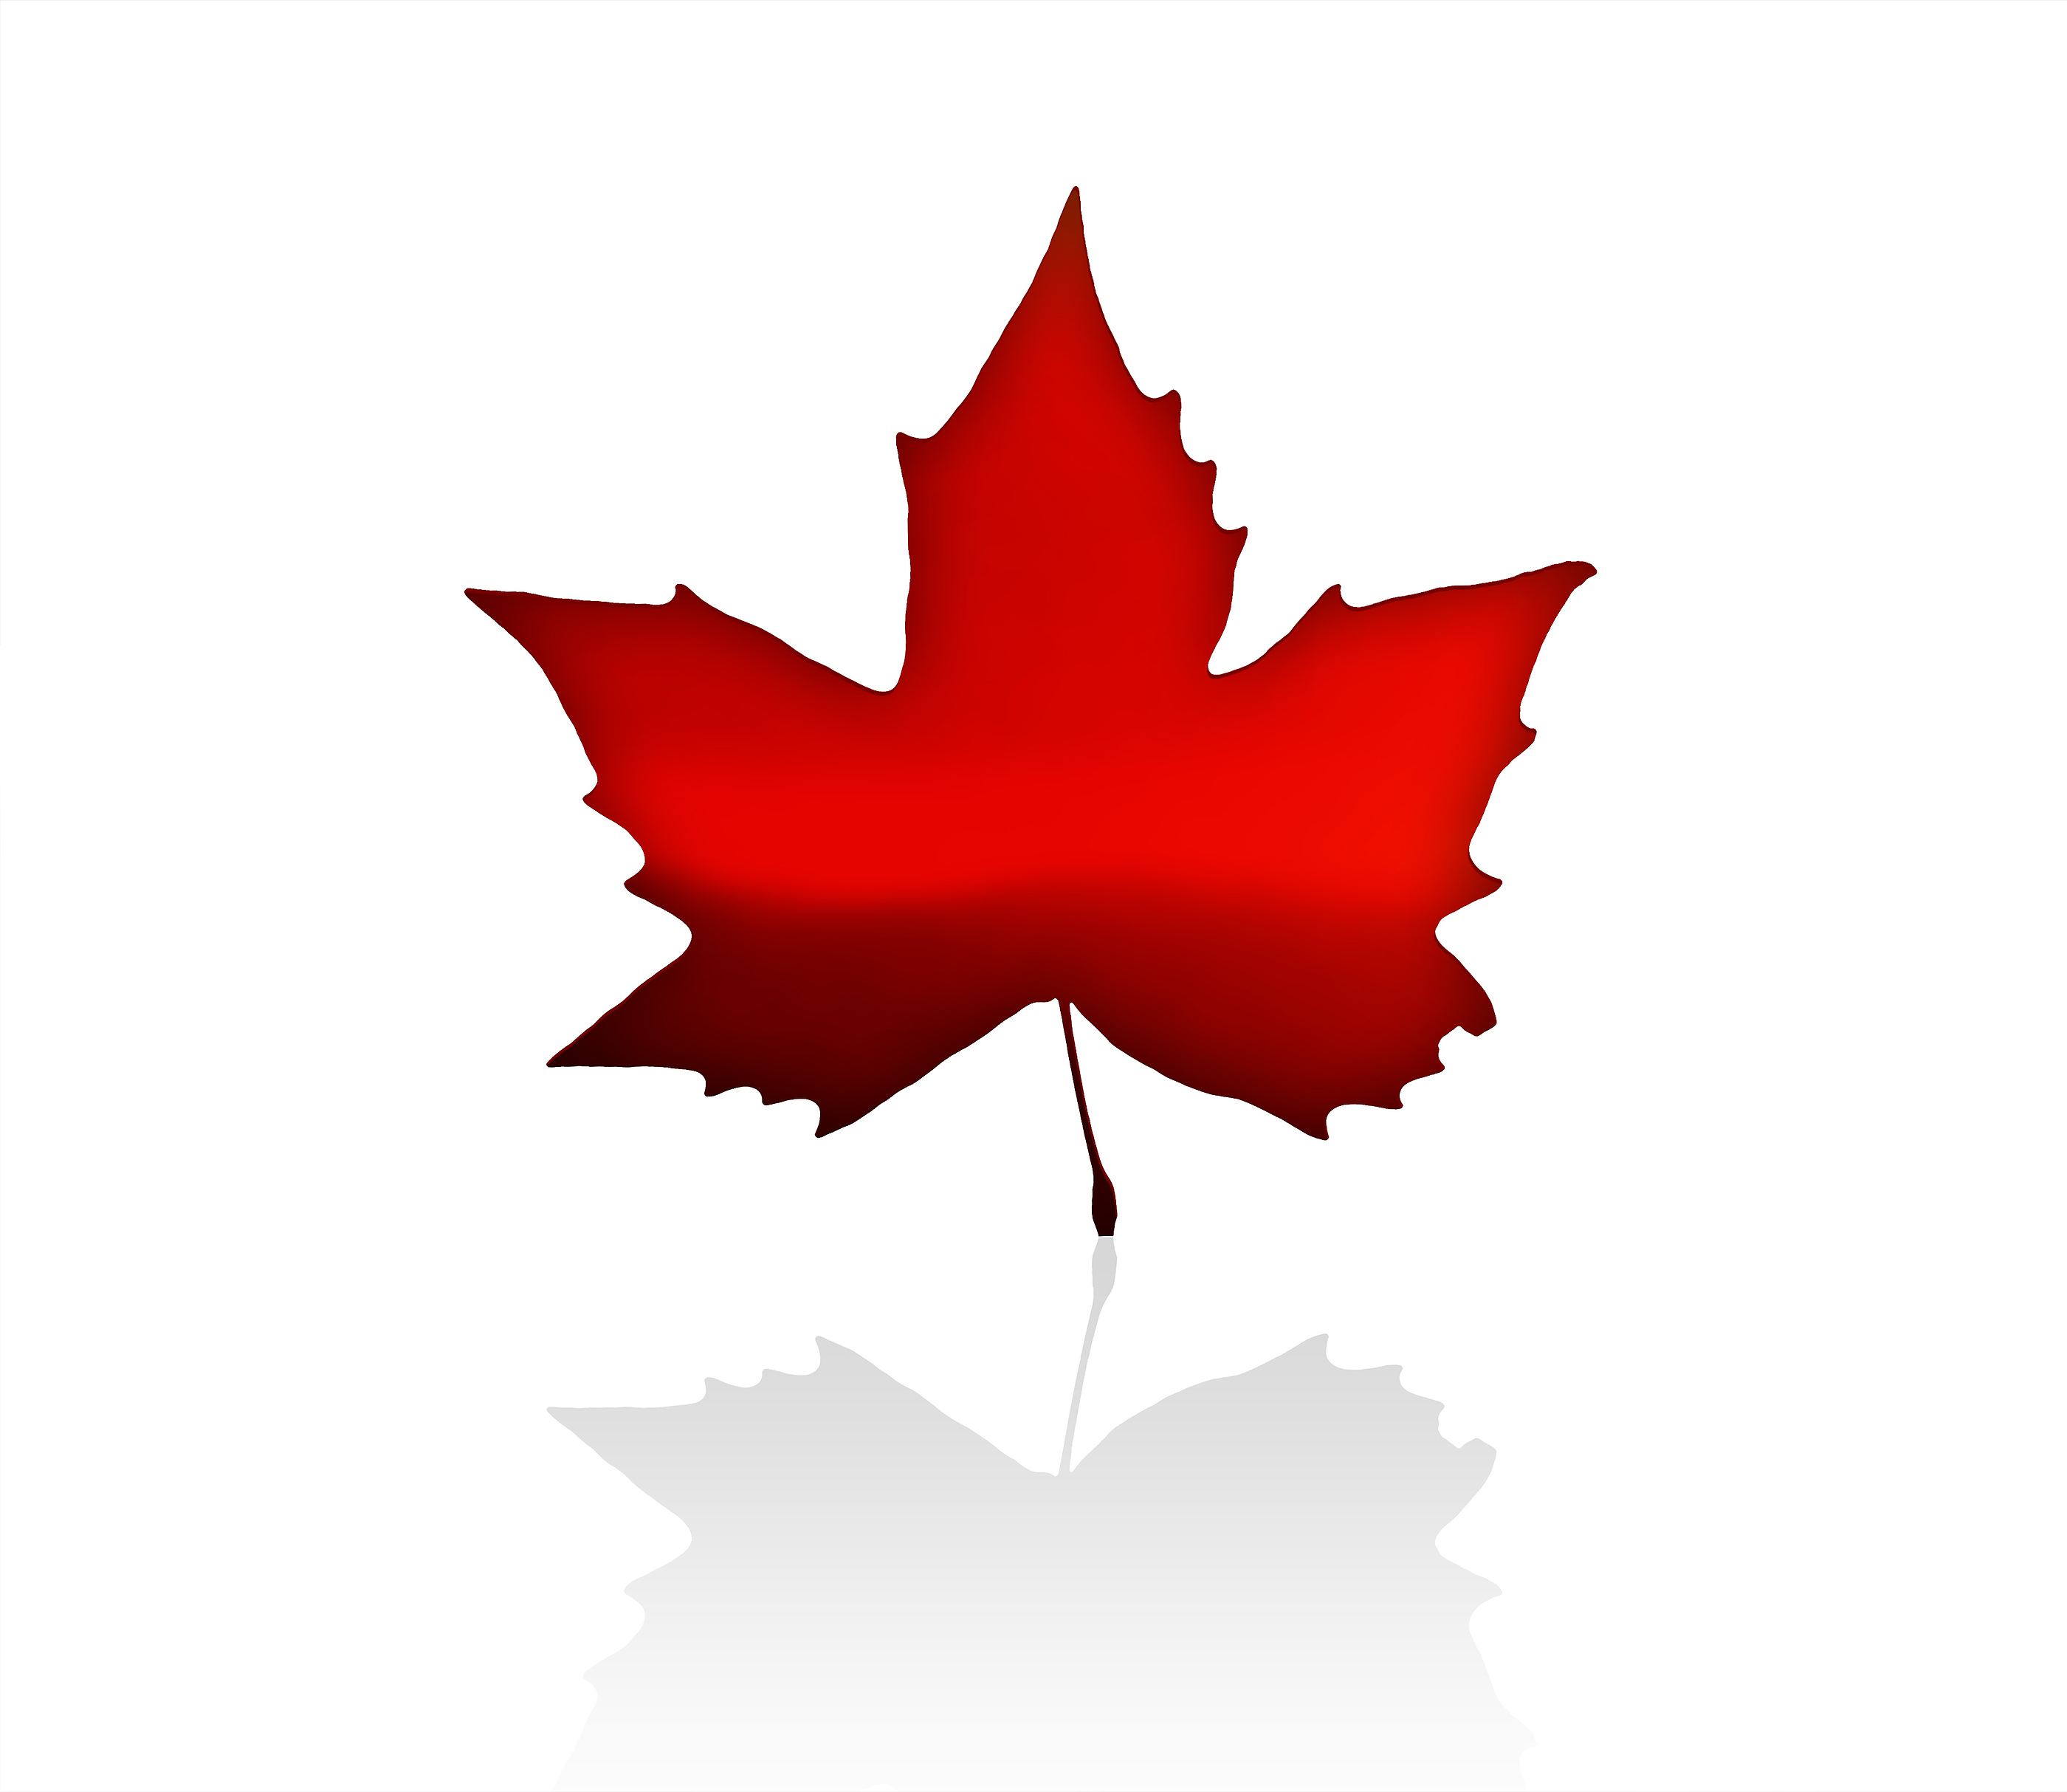 Canadian maple leaf images search results